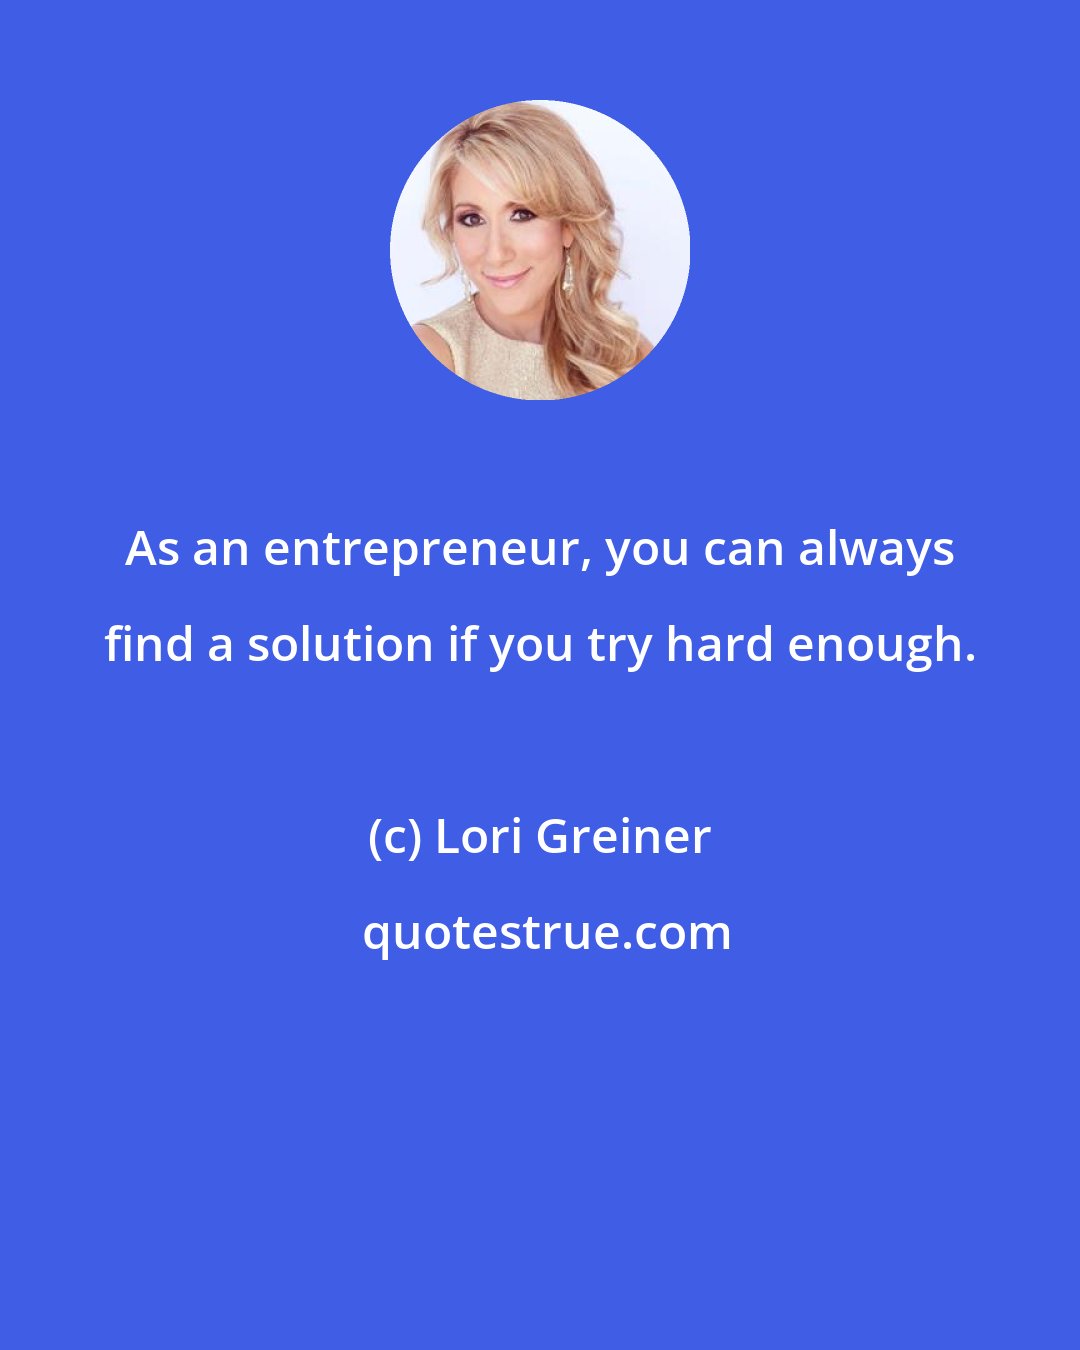 Lori Greiner: As an entrepreneur, you can always find a solution if you try hard enough.